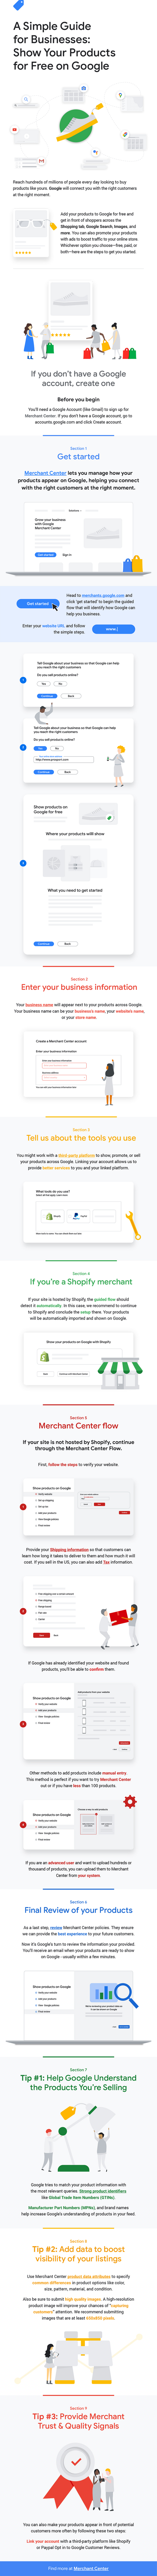 how to use google to showcase your ecommerce products for free infographic